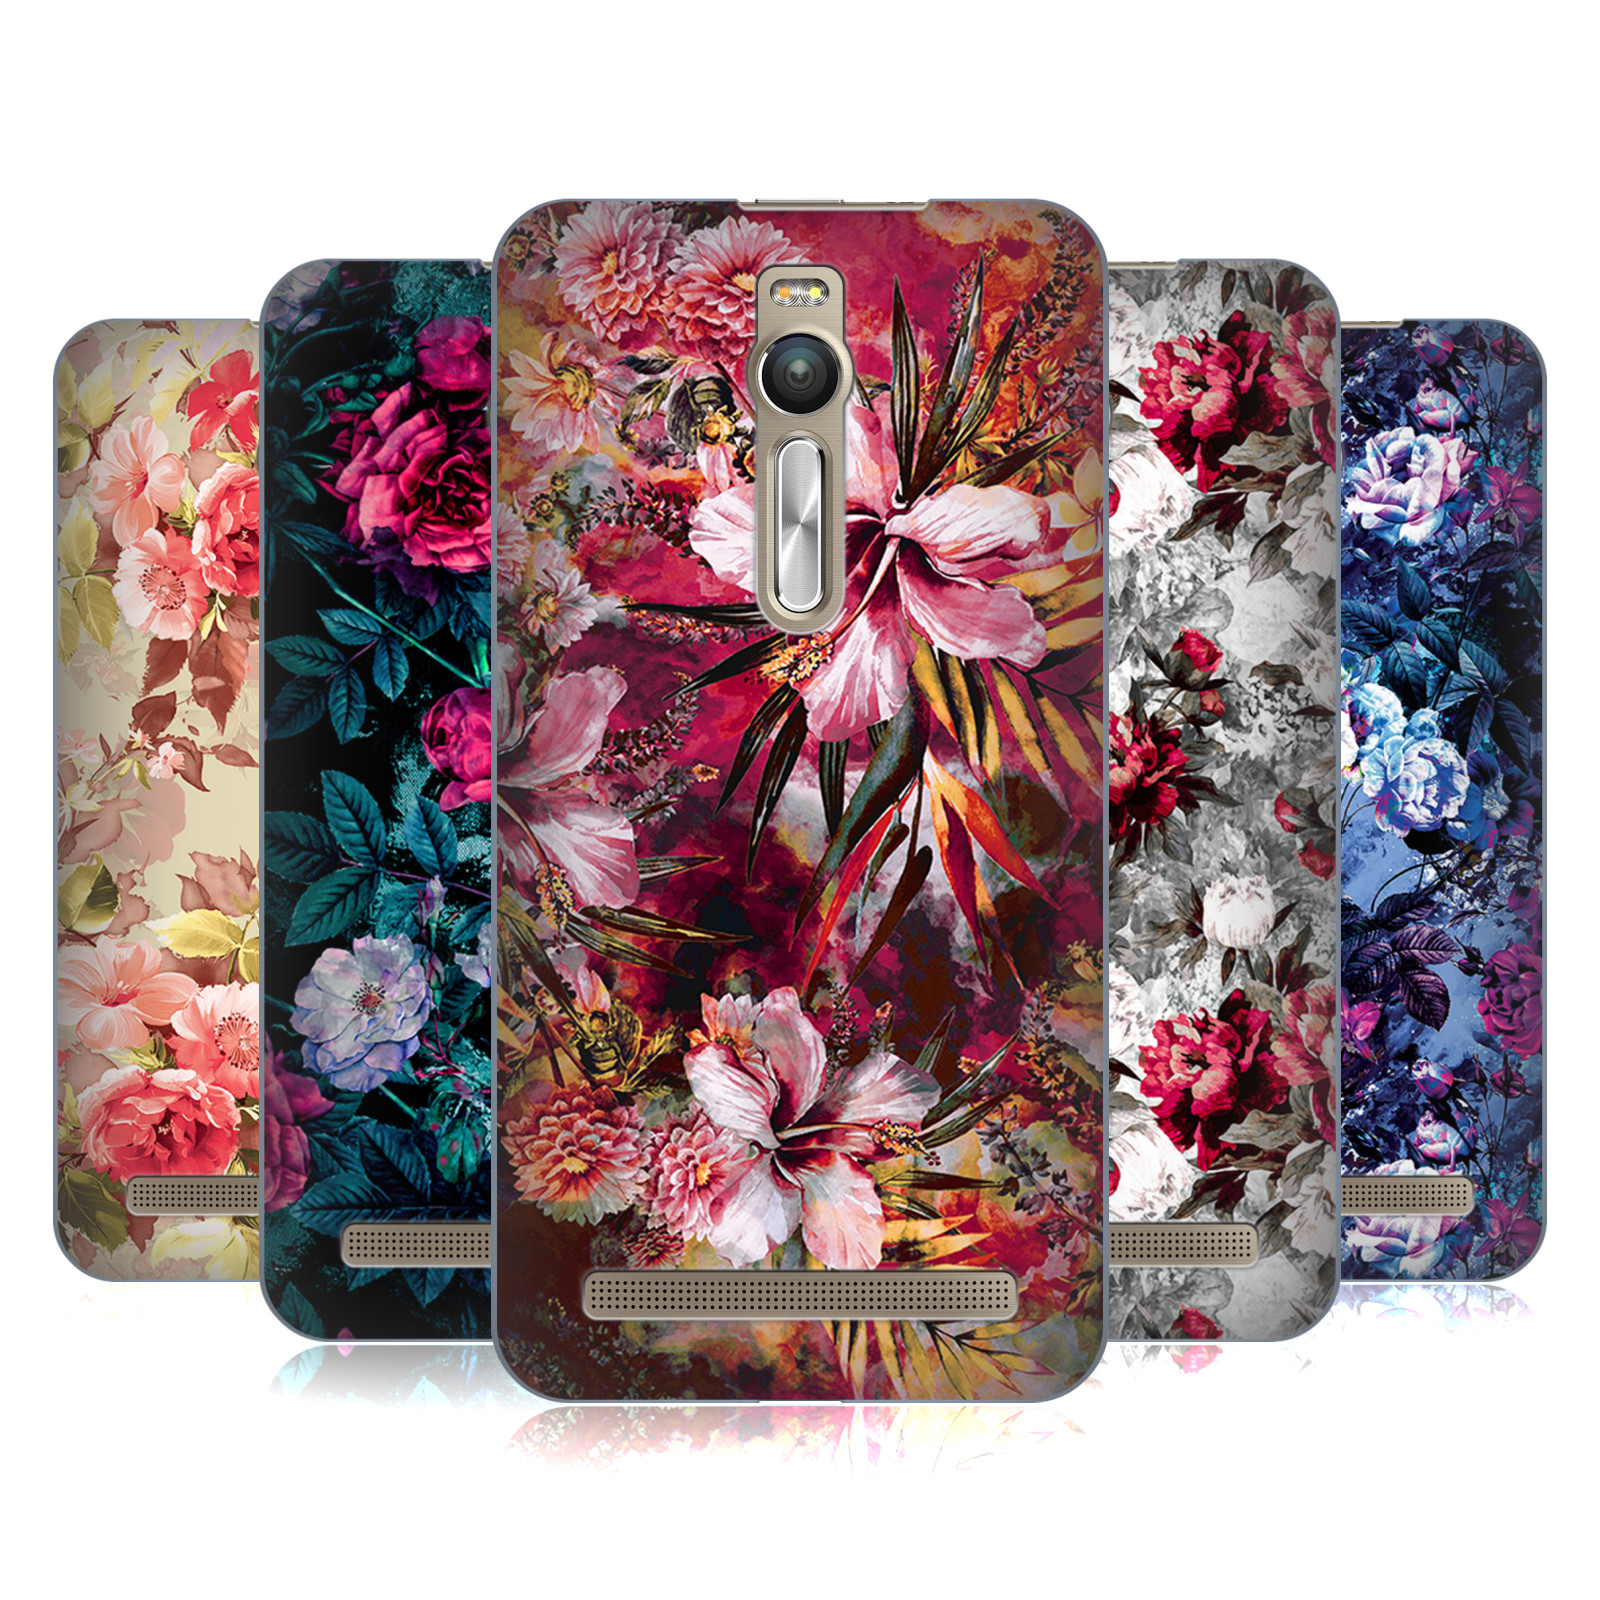 OFFICIAL RIZA PEKER FLOWERS HARD BACK CASE FOR ONEPLUS ASUS AMAZON